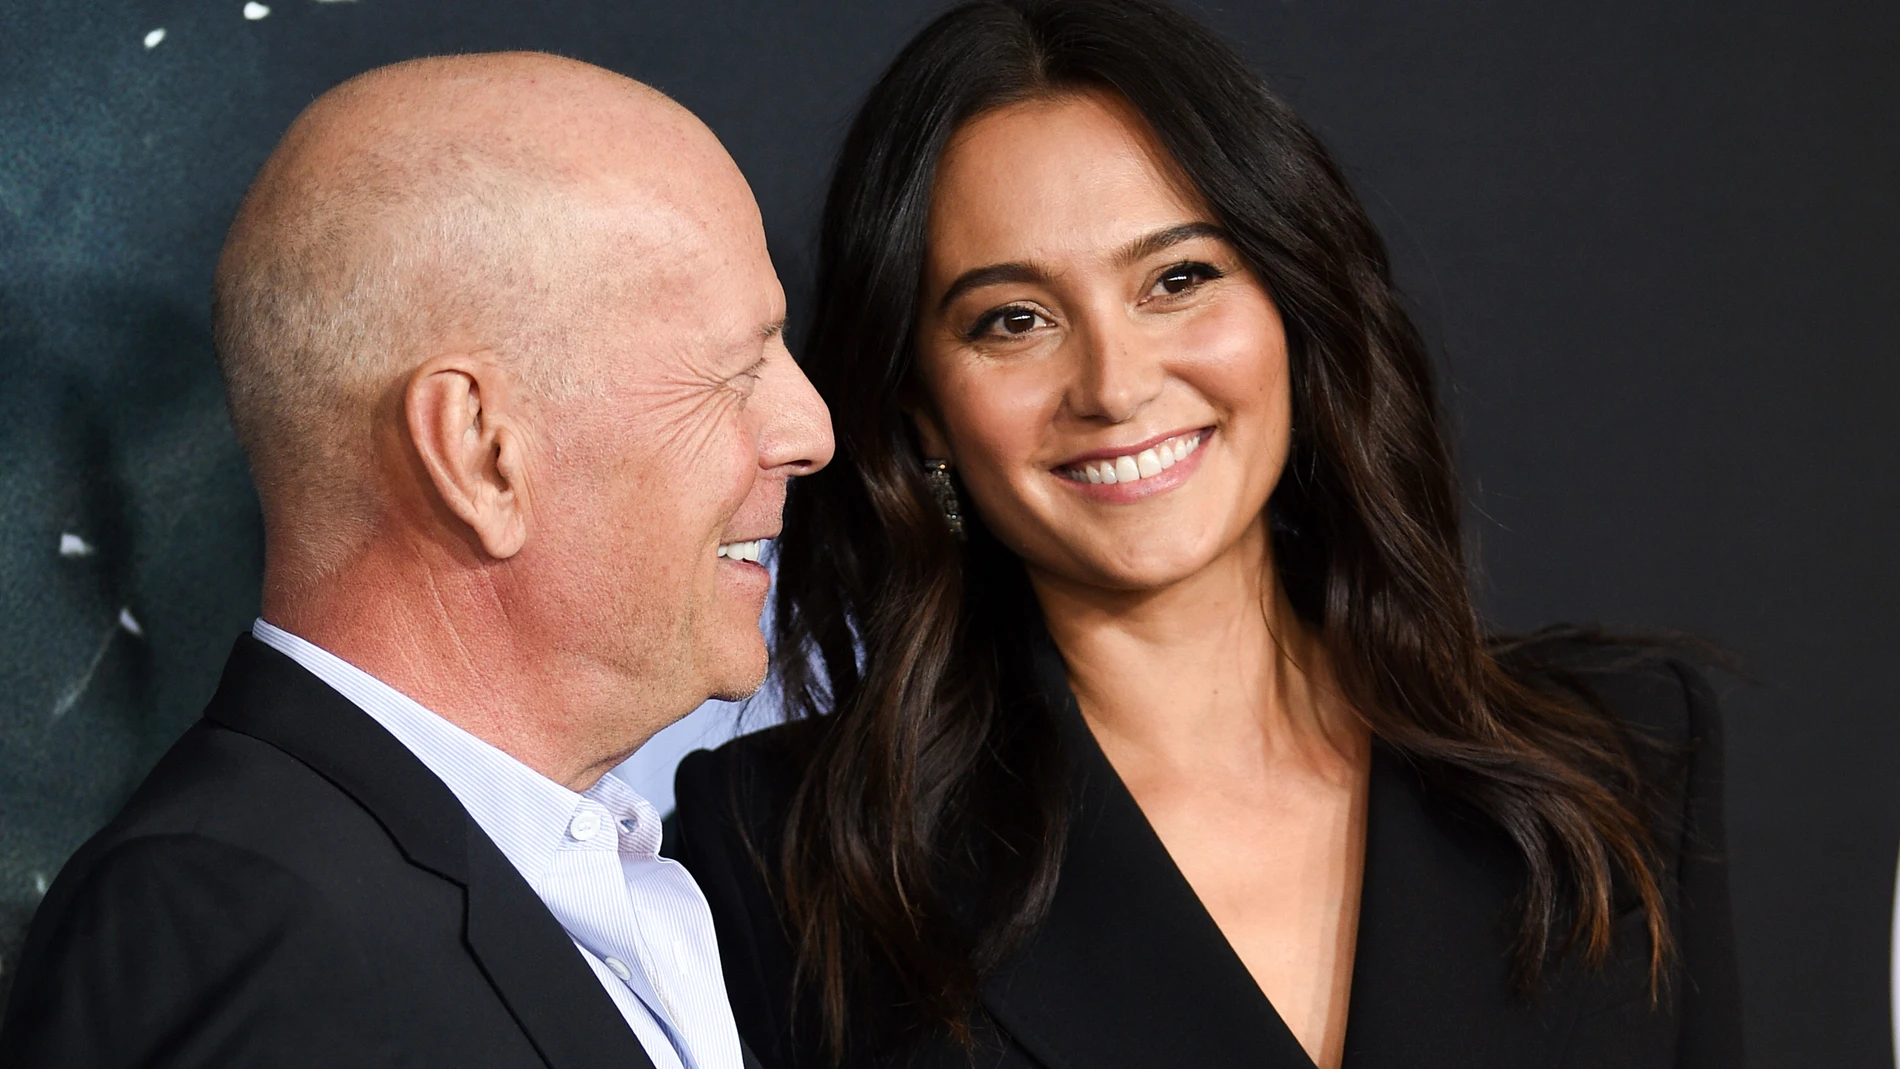 FILE - Actor Bruce Willis, left, and his wife Emma Heming Willis attend the premiere of "Glass" in New York on Jan. 15, 2019. Heming Willis is working on a guide to care giving that draws upon her experiences tending to her husband who has been diagnosed with frontotemporal dementia. The book, currently untitled, is scheduled for 2025. (Photo by Evan Agostini/Invision/AP, File)